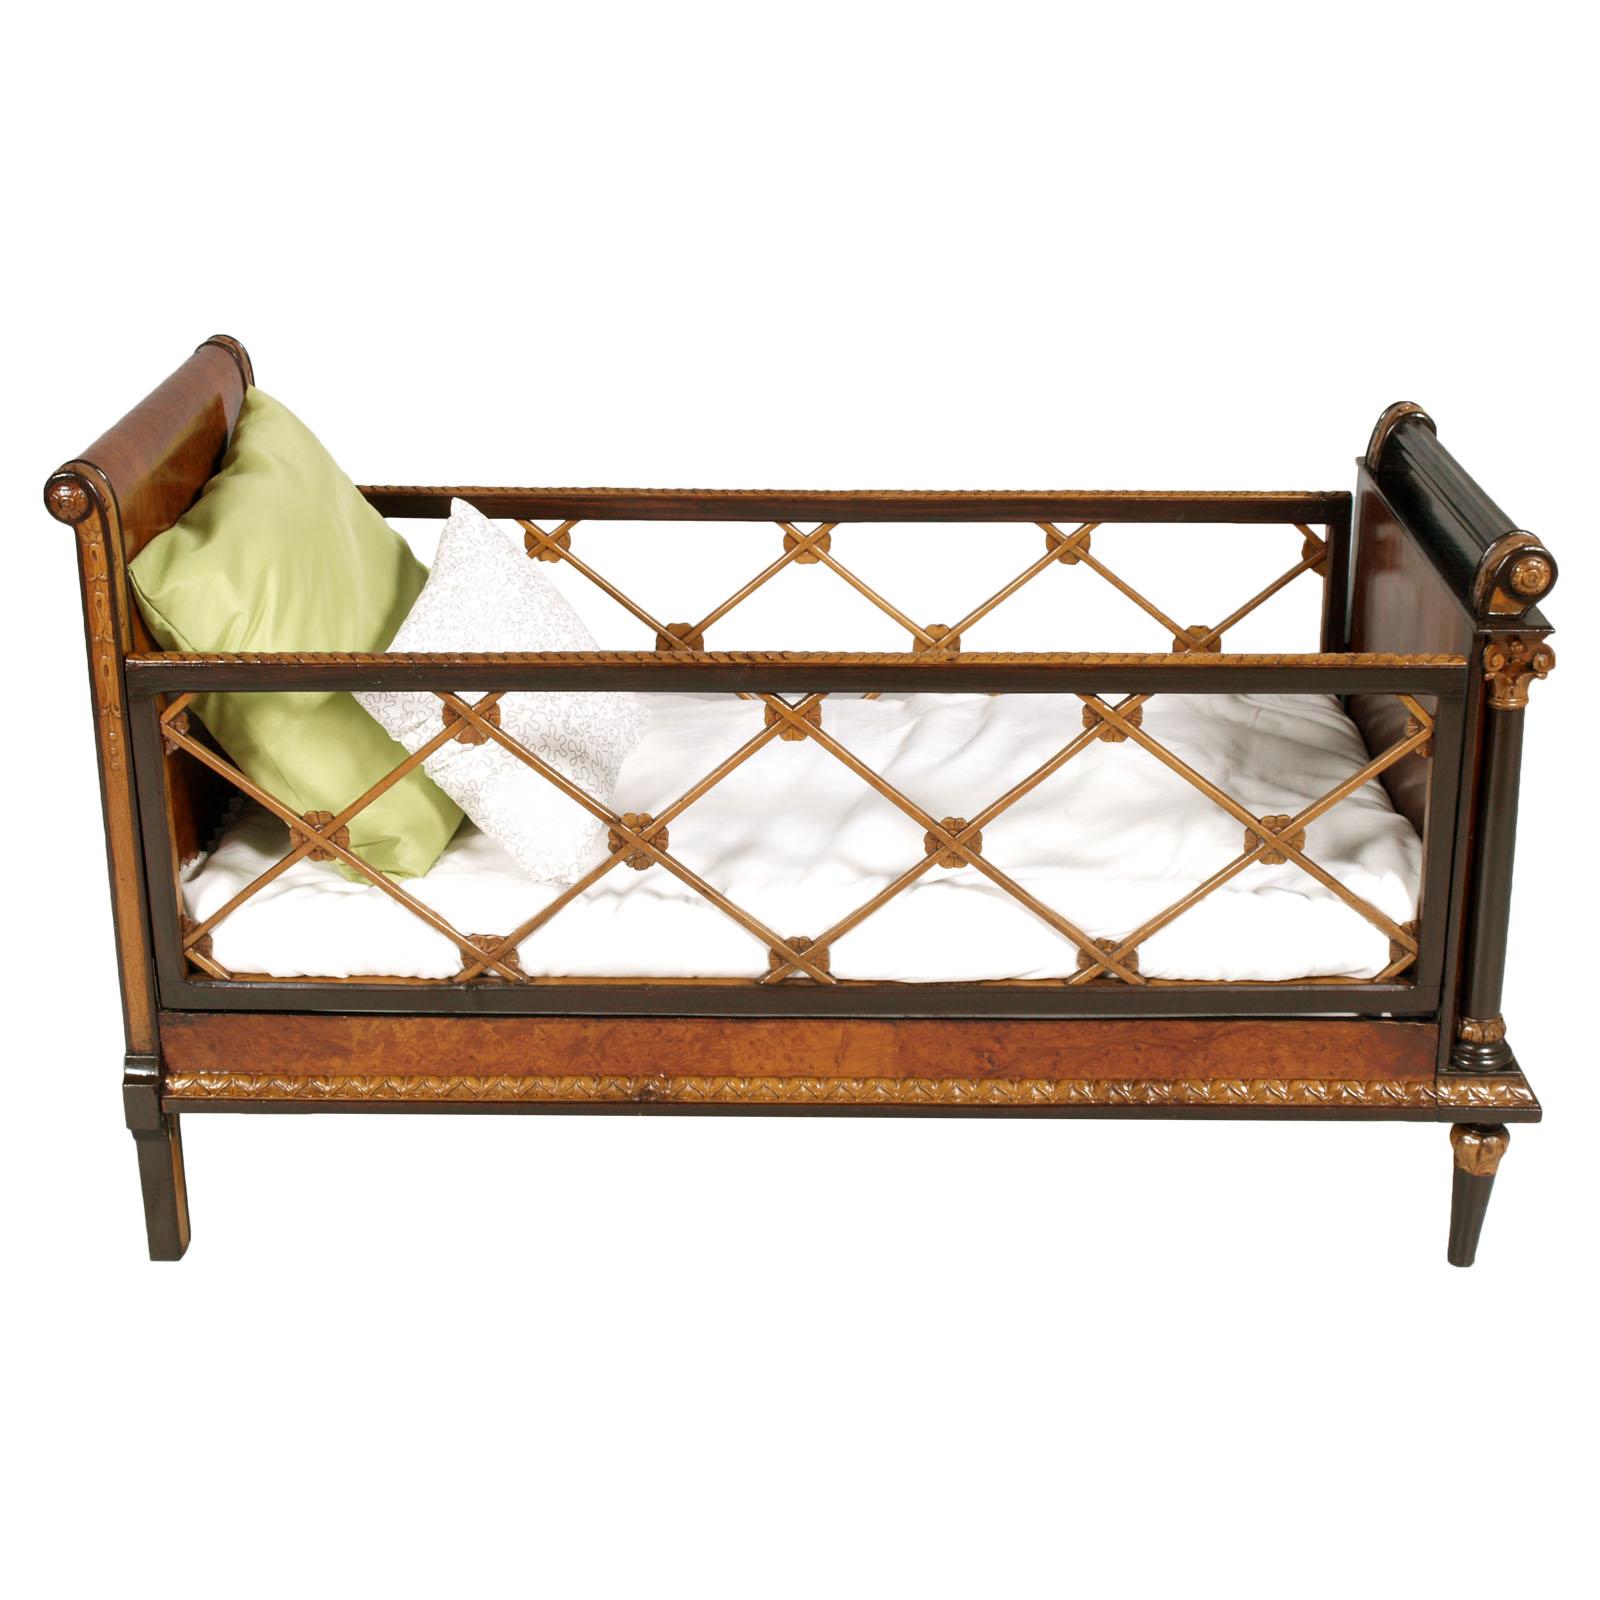 19th century neoclassic eclectic baby bed or baby cot, in burl walnut, walnut and carved maple, by Permanente Mobili Cantù , Palazzi Dell'Arte, Paolo Buffa & Cassi Ramelli attributed 

Measure cm: H 82, W 65, D 135 (internal 55 x